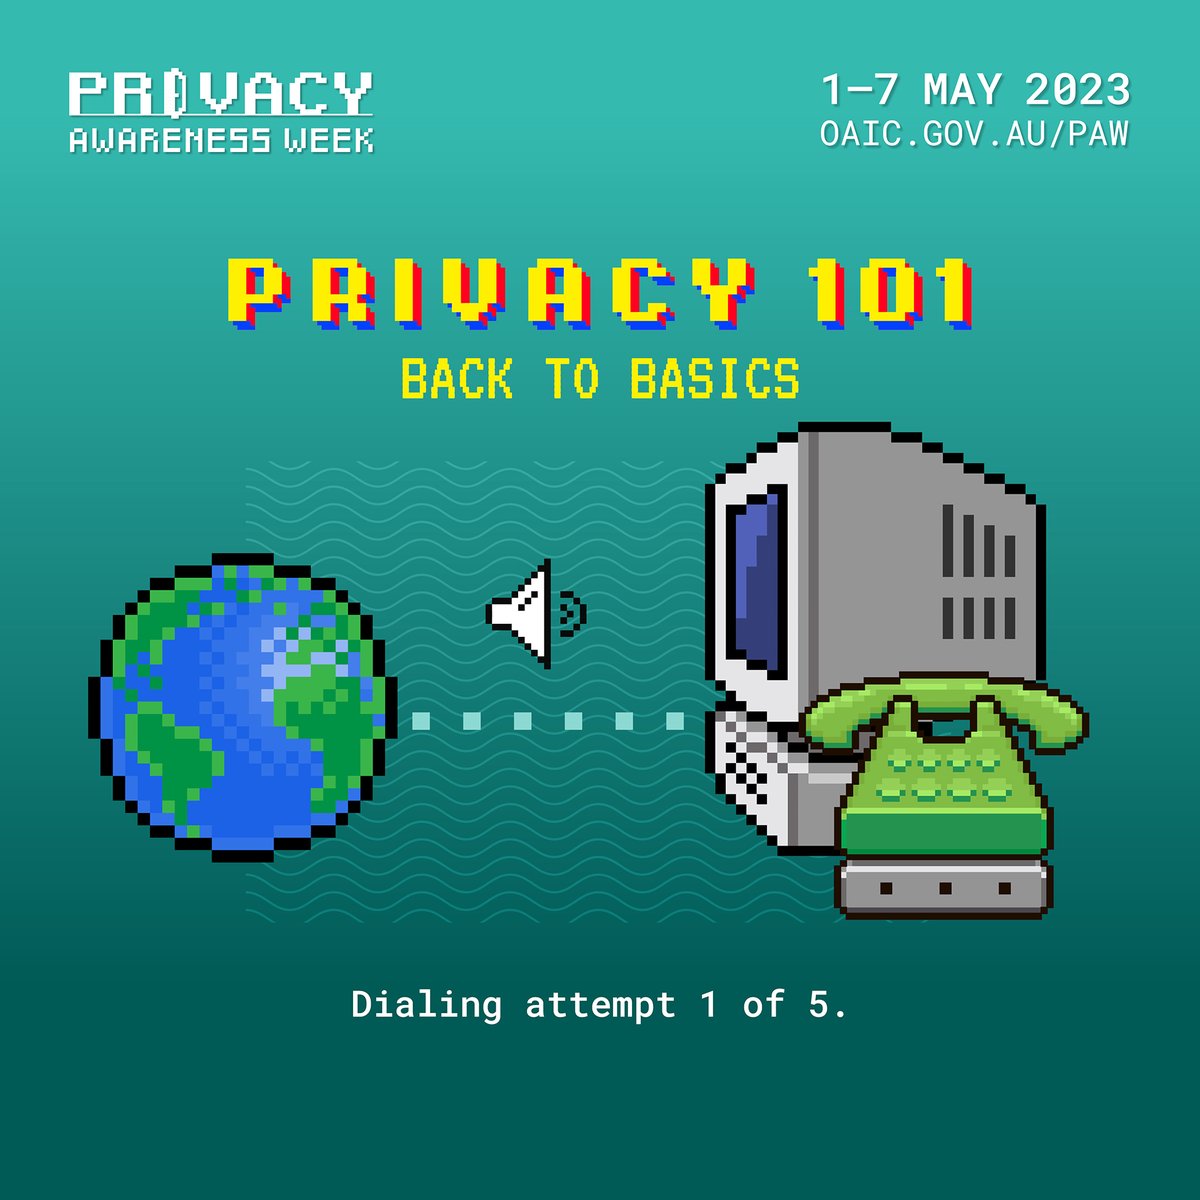 It’s Privacy Awareness Week, a time for sharing tips about privacy to help secure personal information. Here’s one: it’s important for businesses to only collect personal information that is reasonably necessary to carry out business functions #PAW2023‌